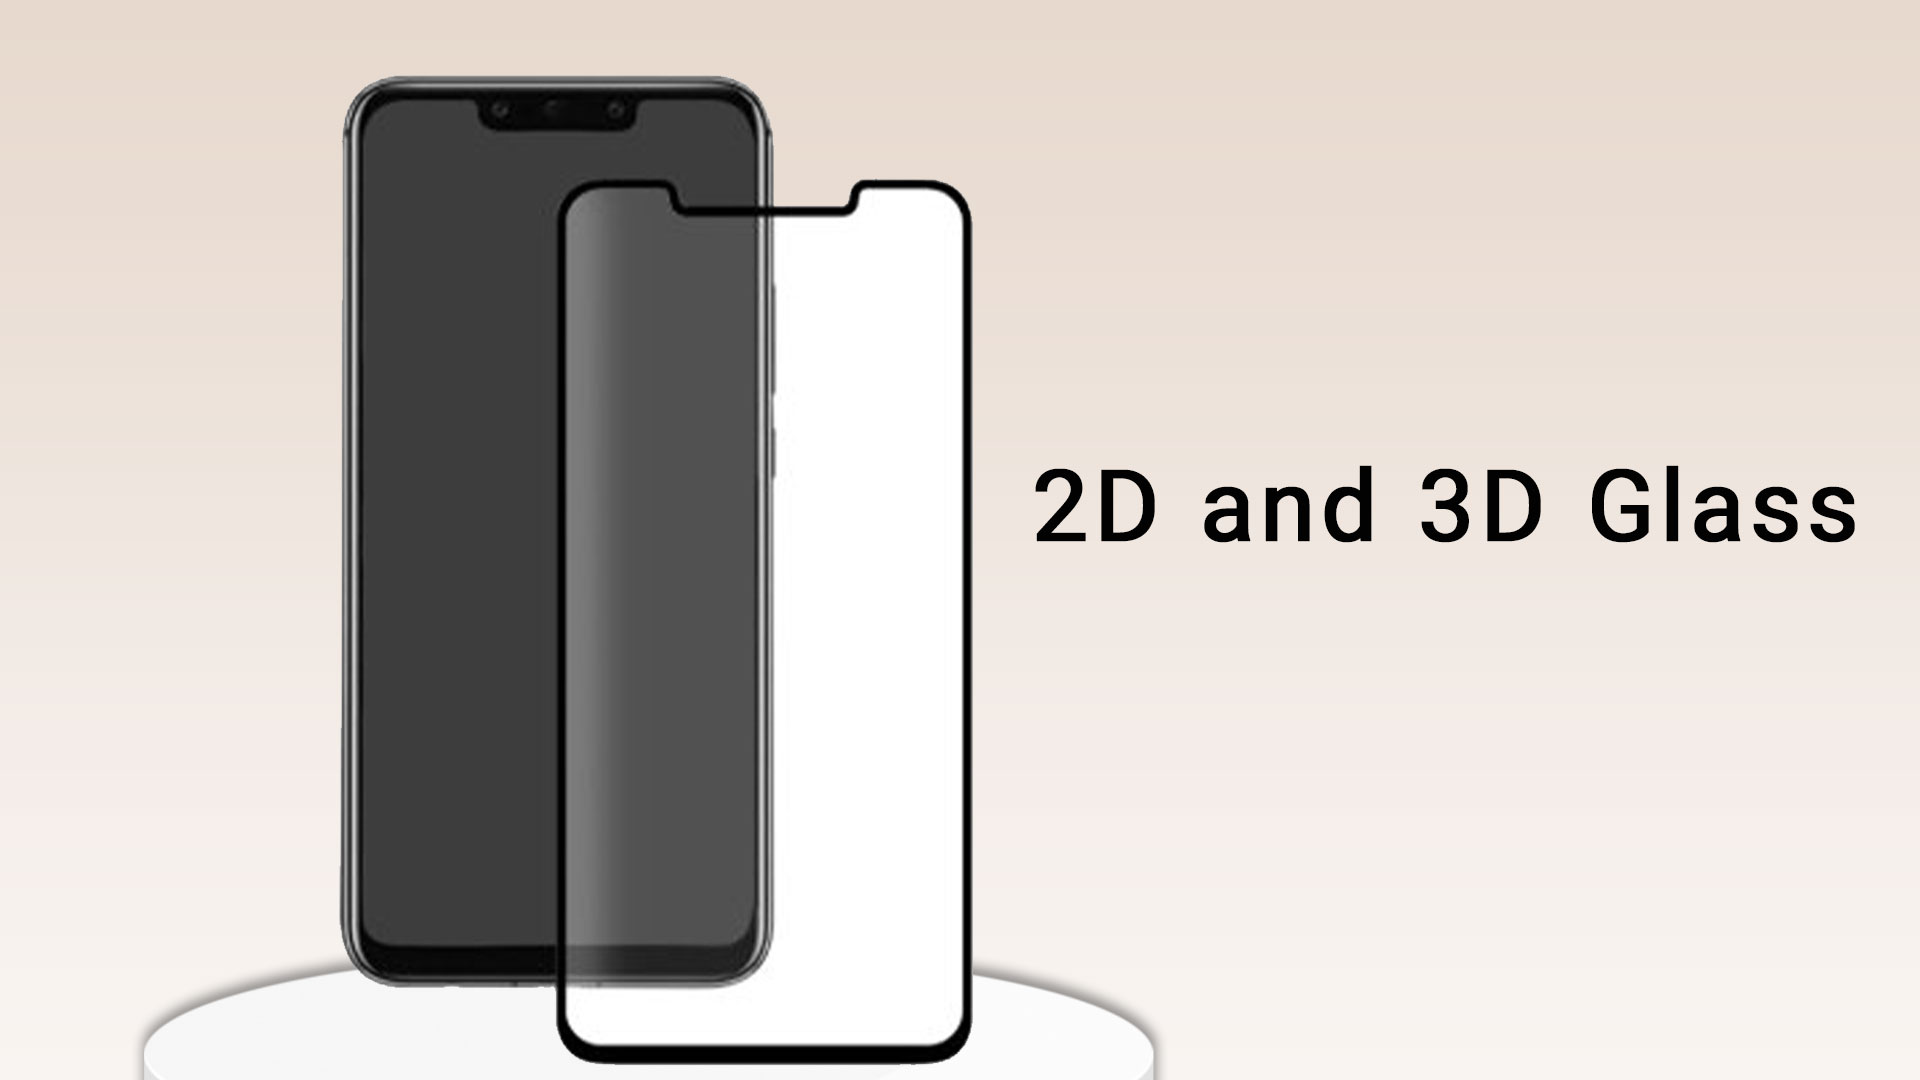 2D and 3D Glass